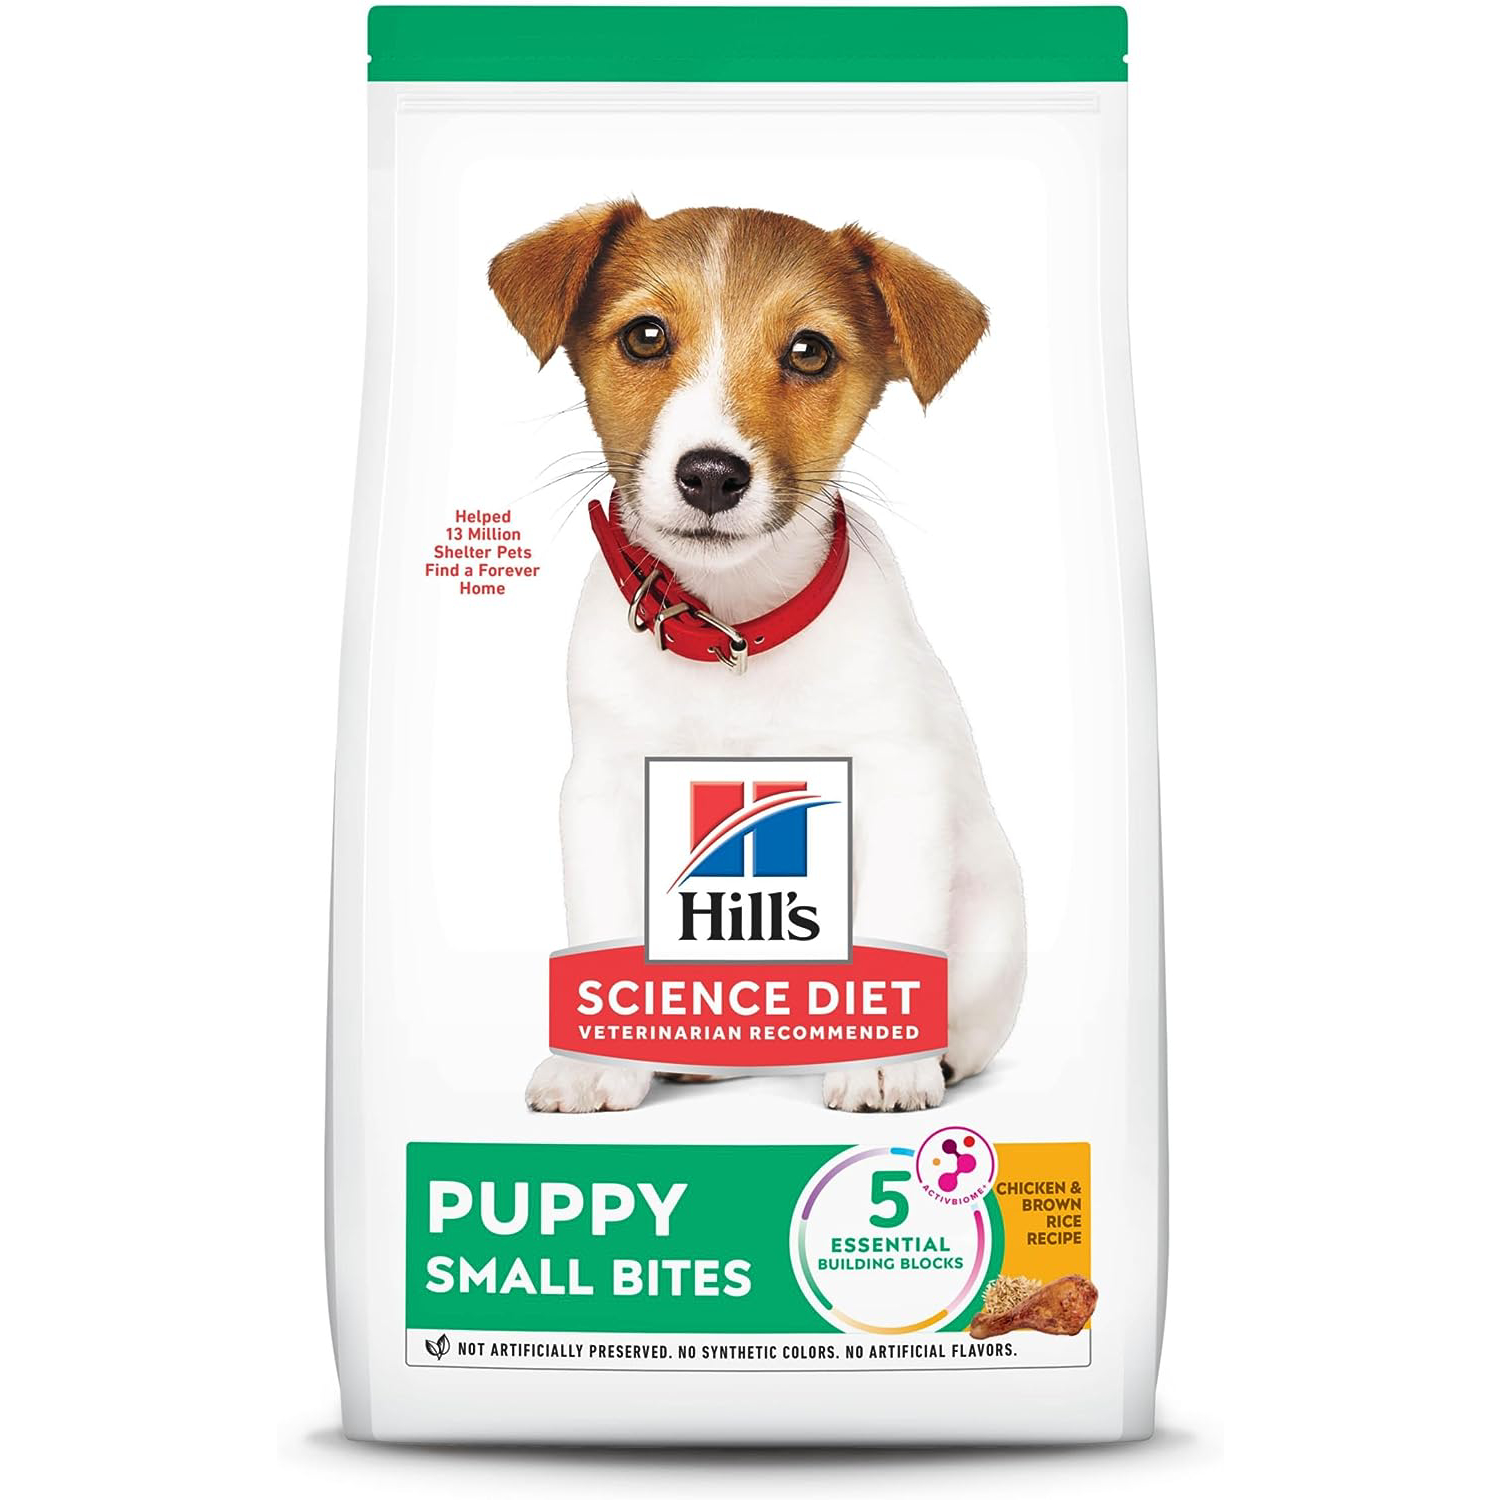 Hill's Science Diet Puppy Small Bites Chicken & Brown Rice Recipe Dry Dog Food